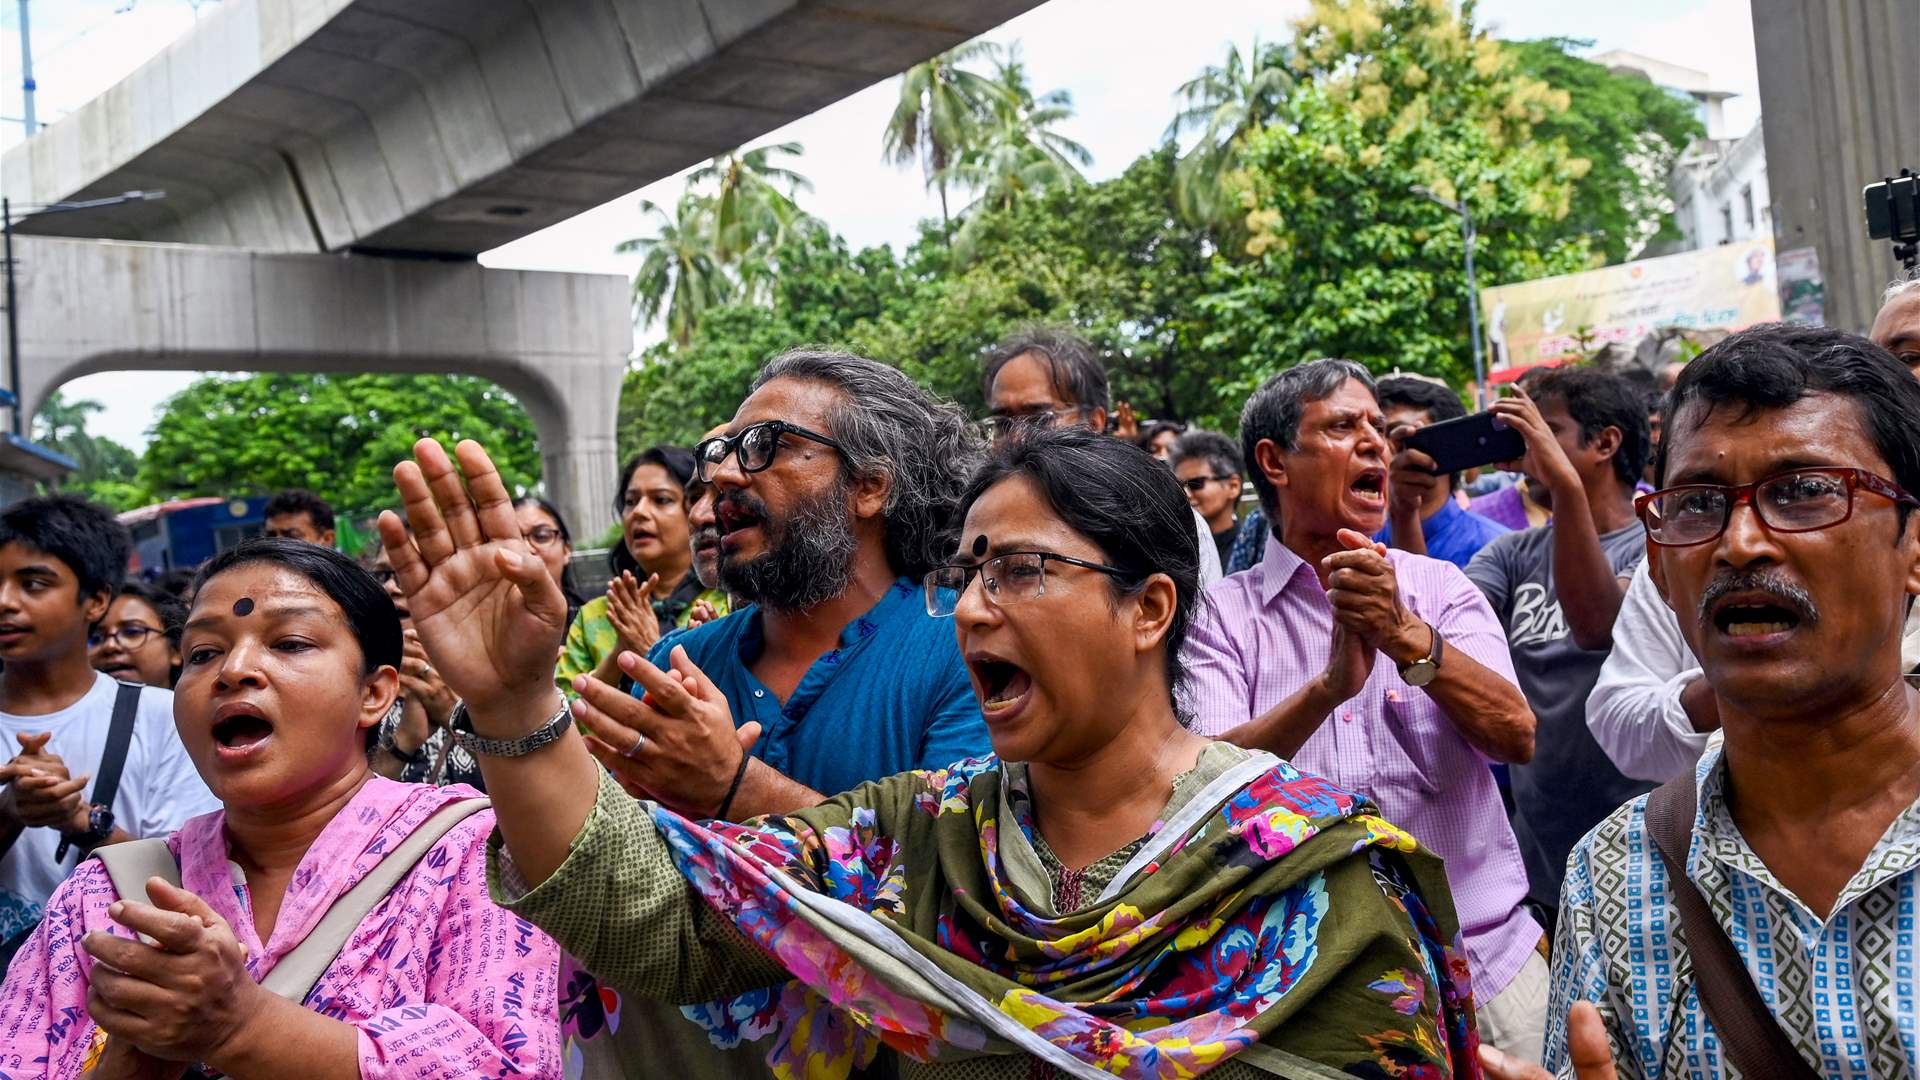 Bangladesh student protest leaders taken by police: Hospital staff